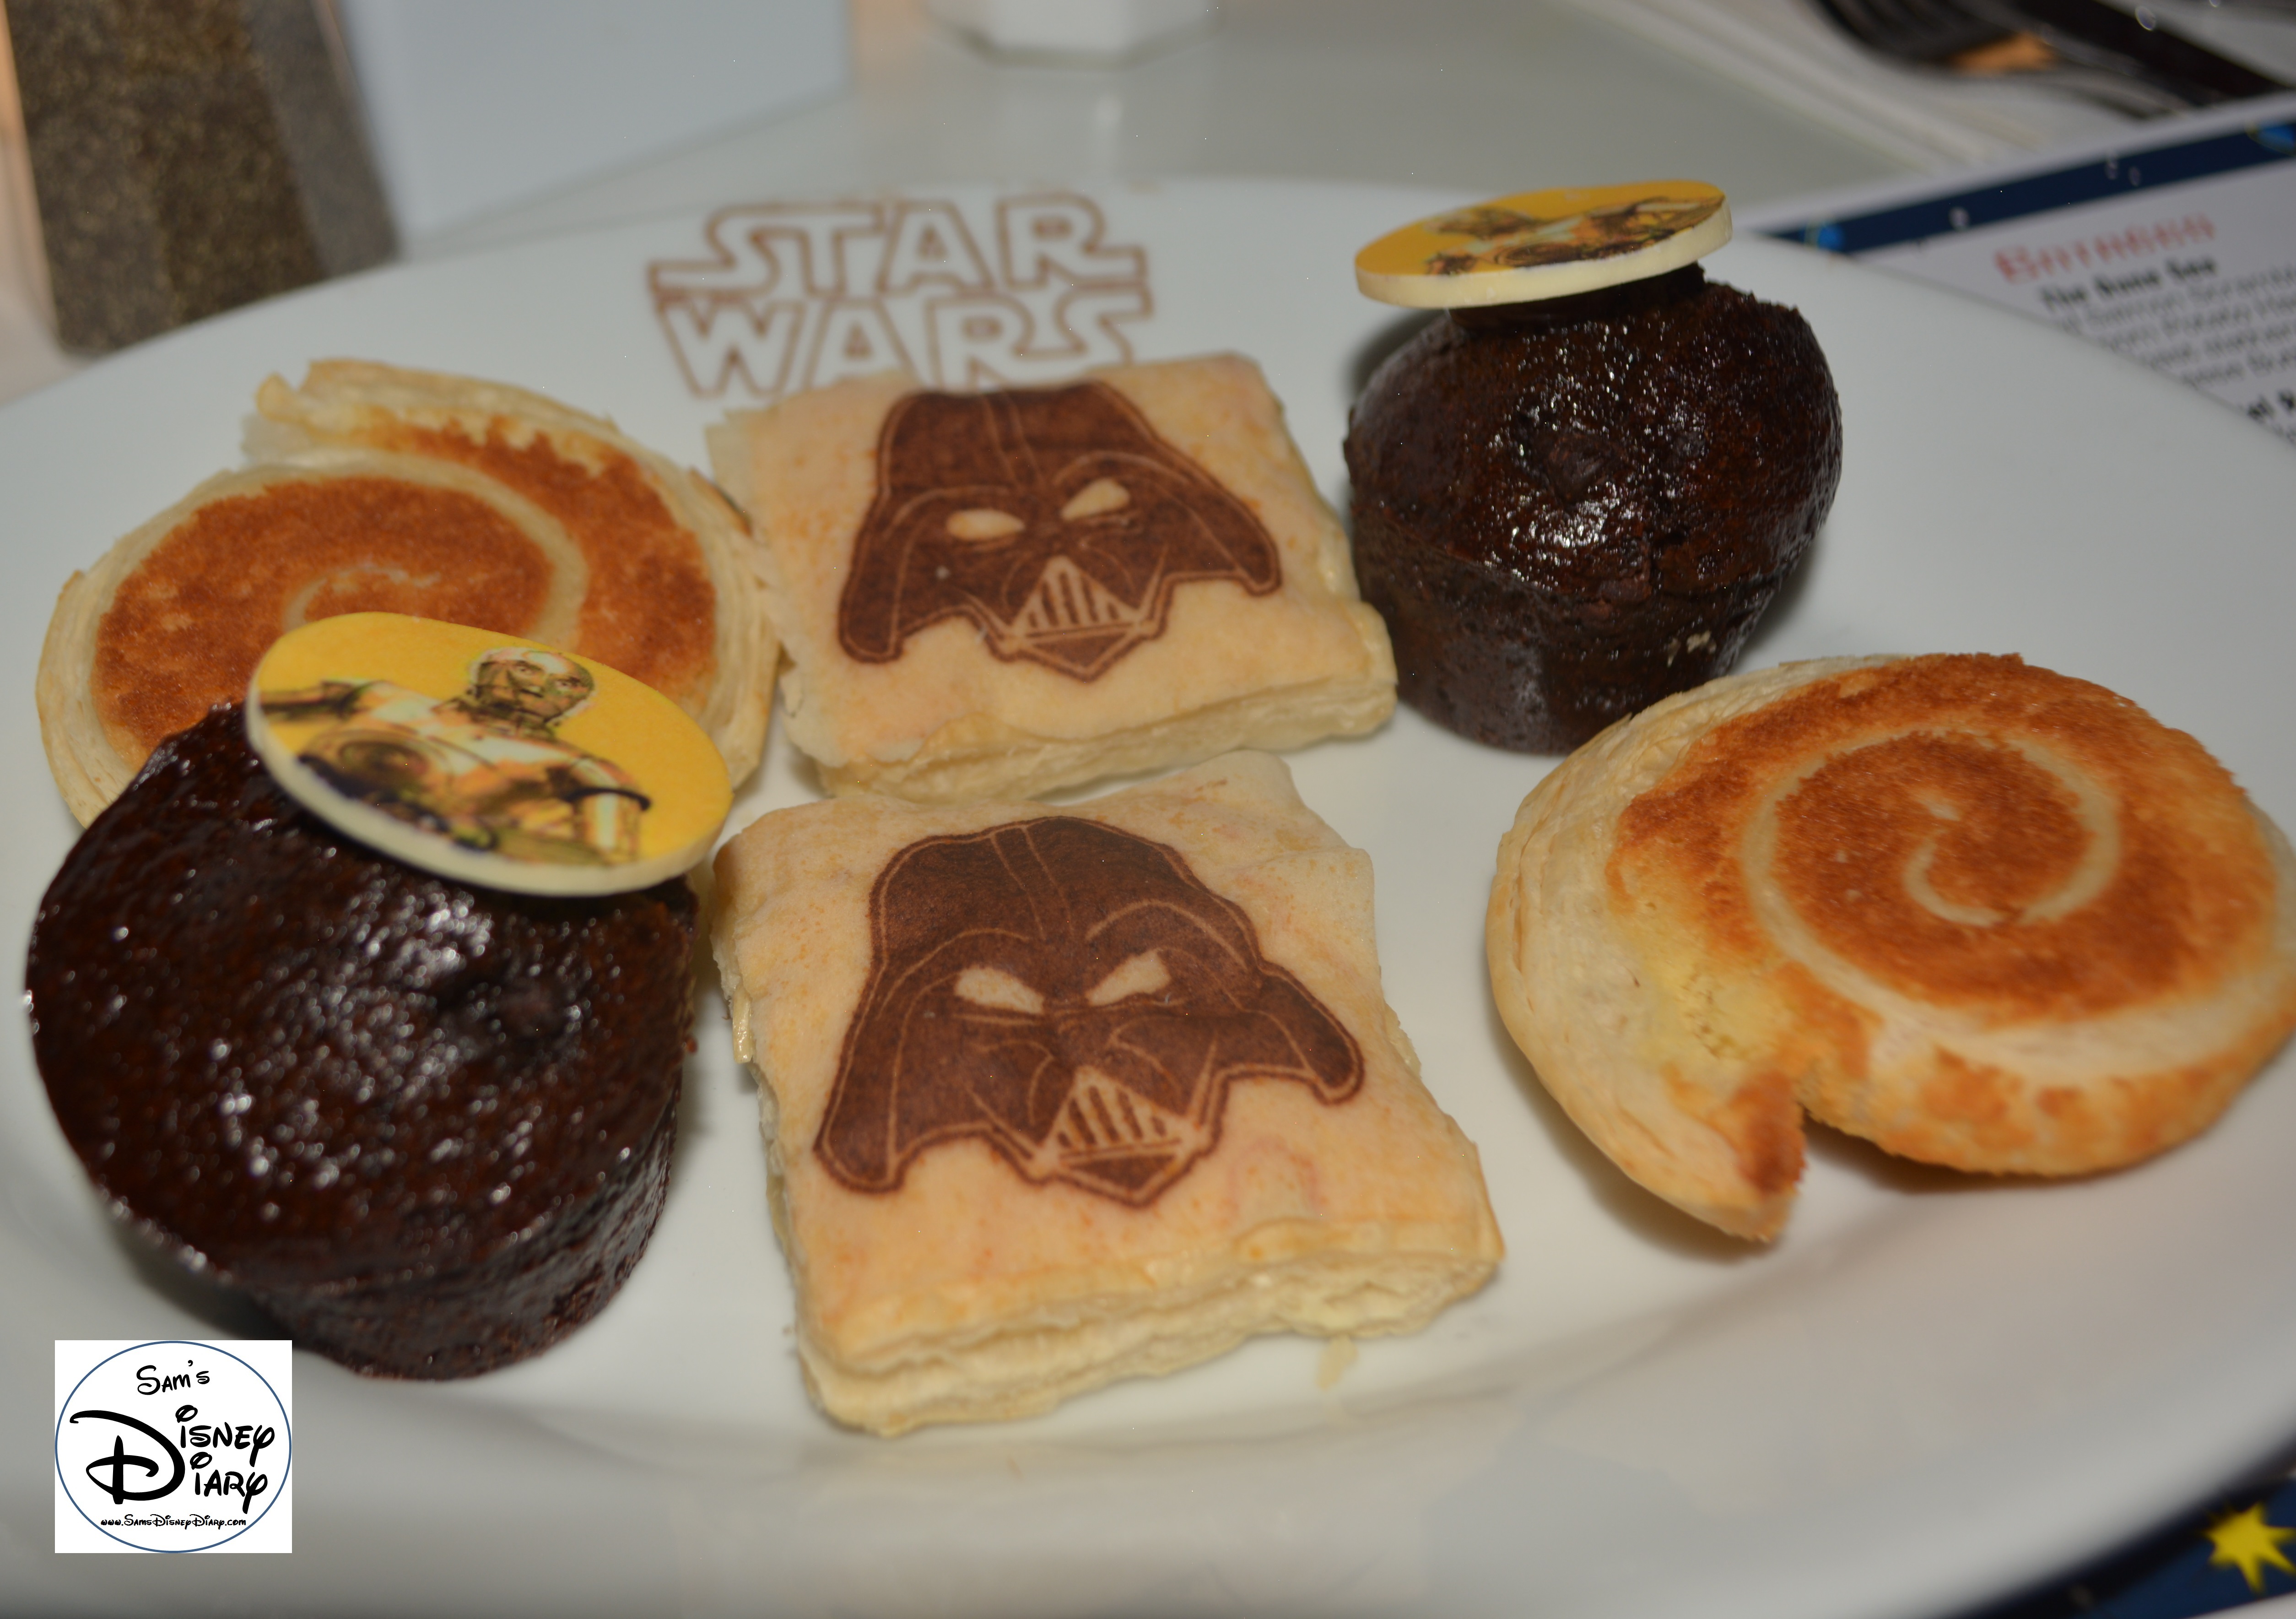 Star Wars Weekend Galactic Breakfast. Breakfast Pastries including Vanilla Cream Turnover, Almond Pastry, and Double Chocolate Muffin 